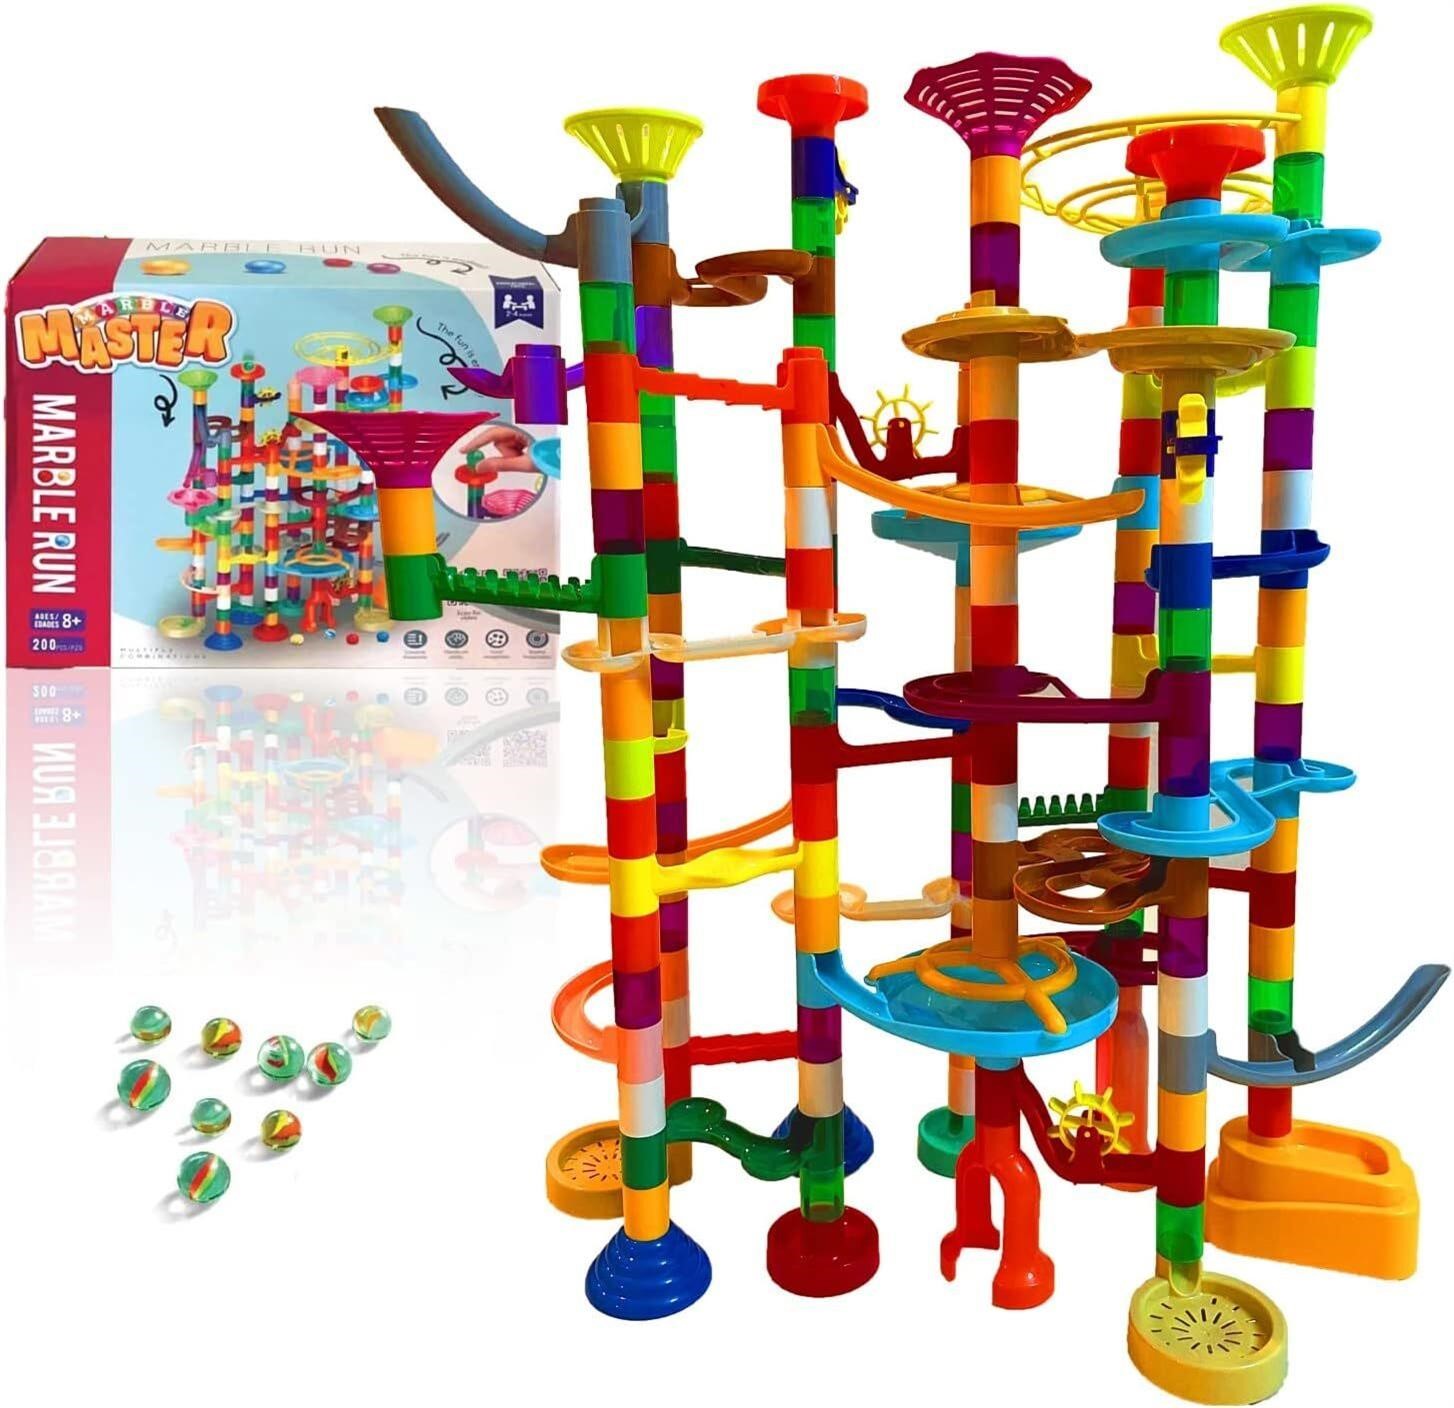 Marble Master Marble Run - 200pc Building Set